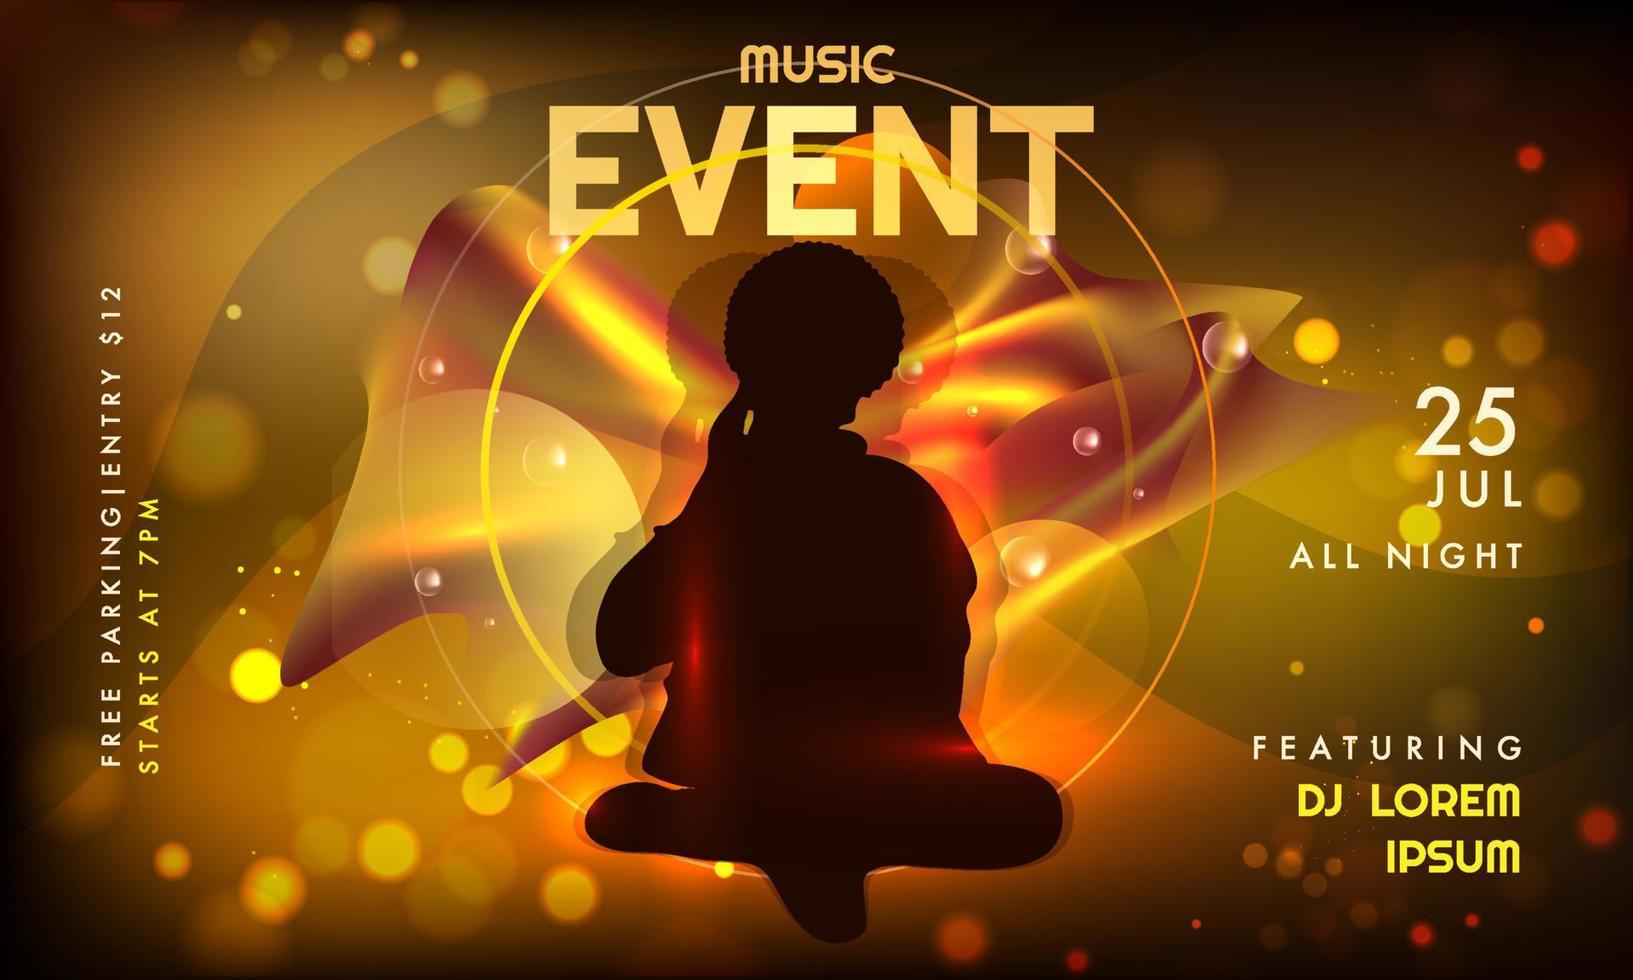 Music Event Invitation, Banner or Flyer Design with Silhouette Modern Female on Golden Silk Fabric Bokeh Background. vector